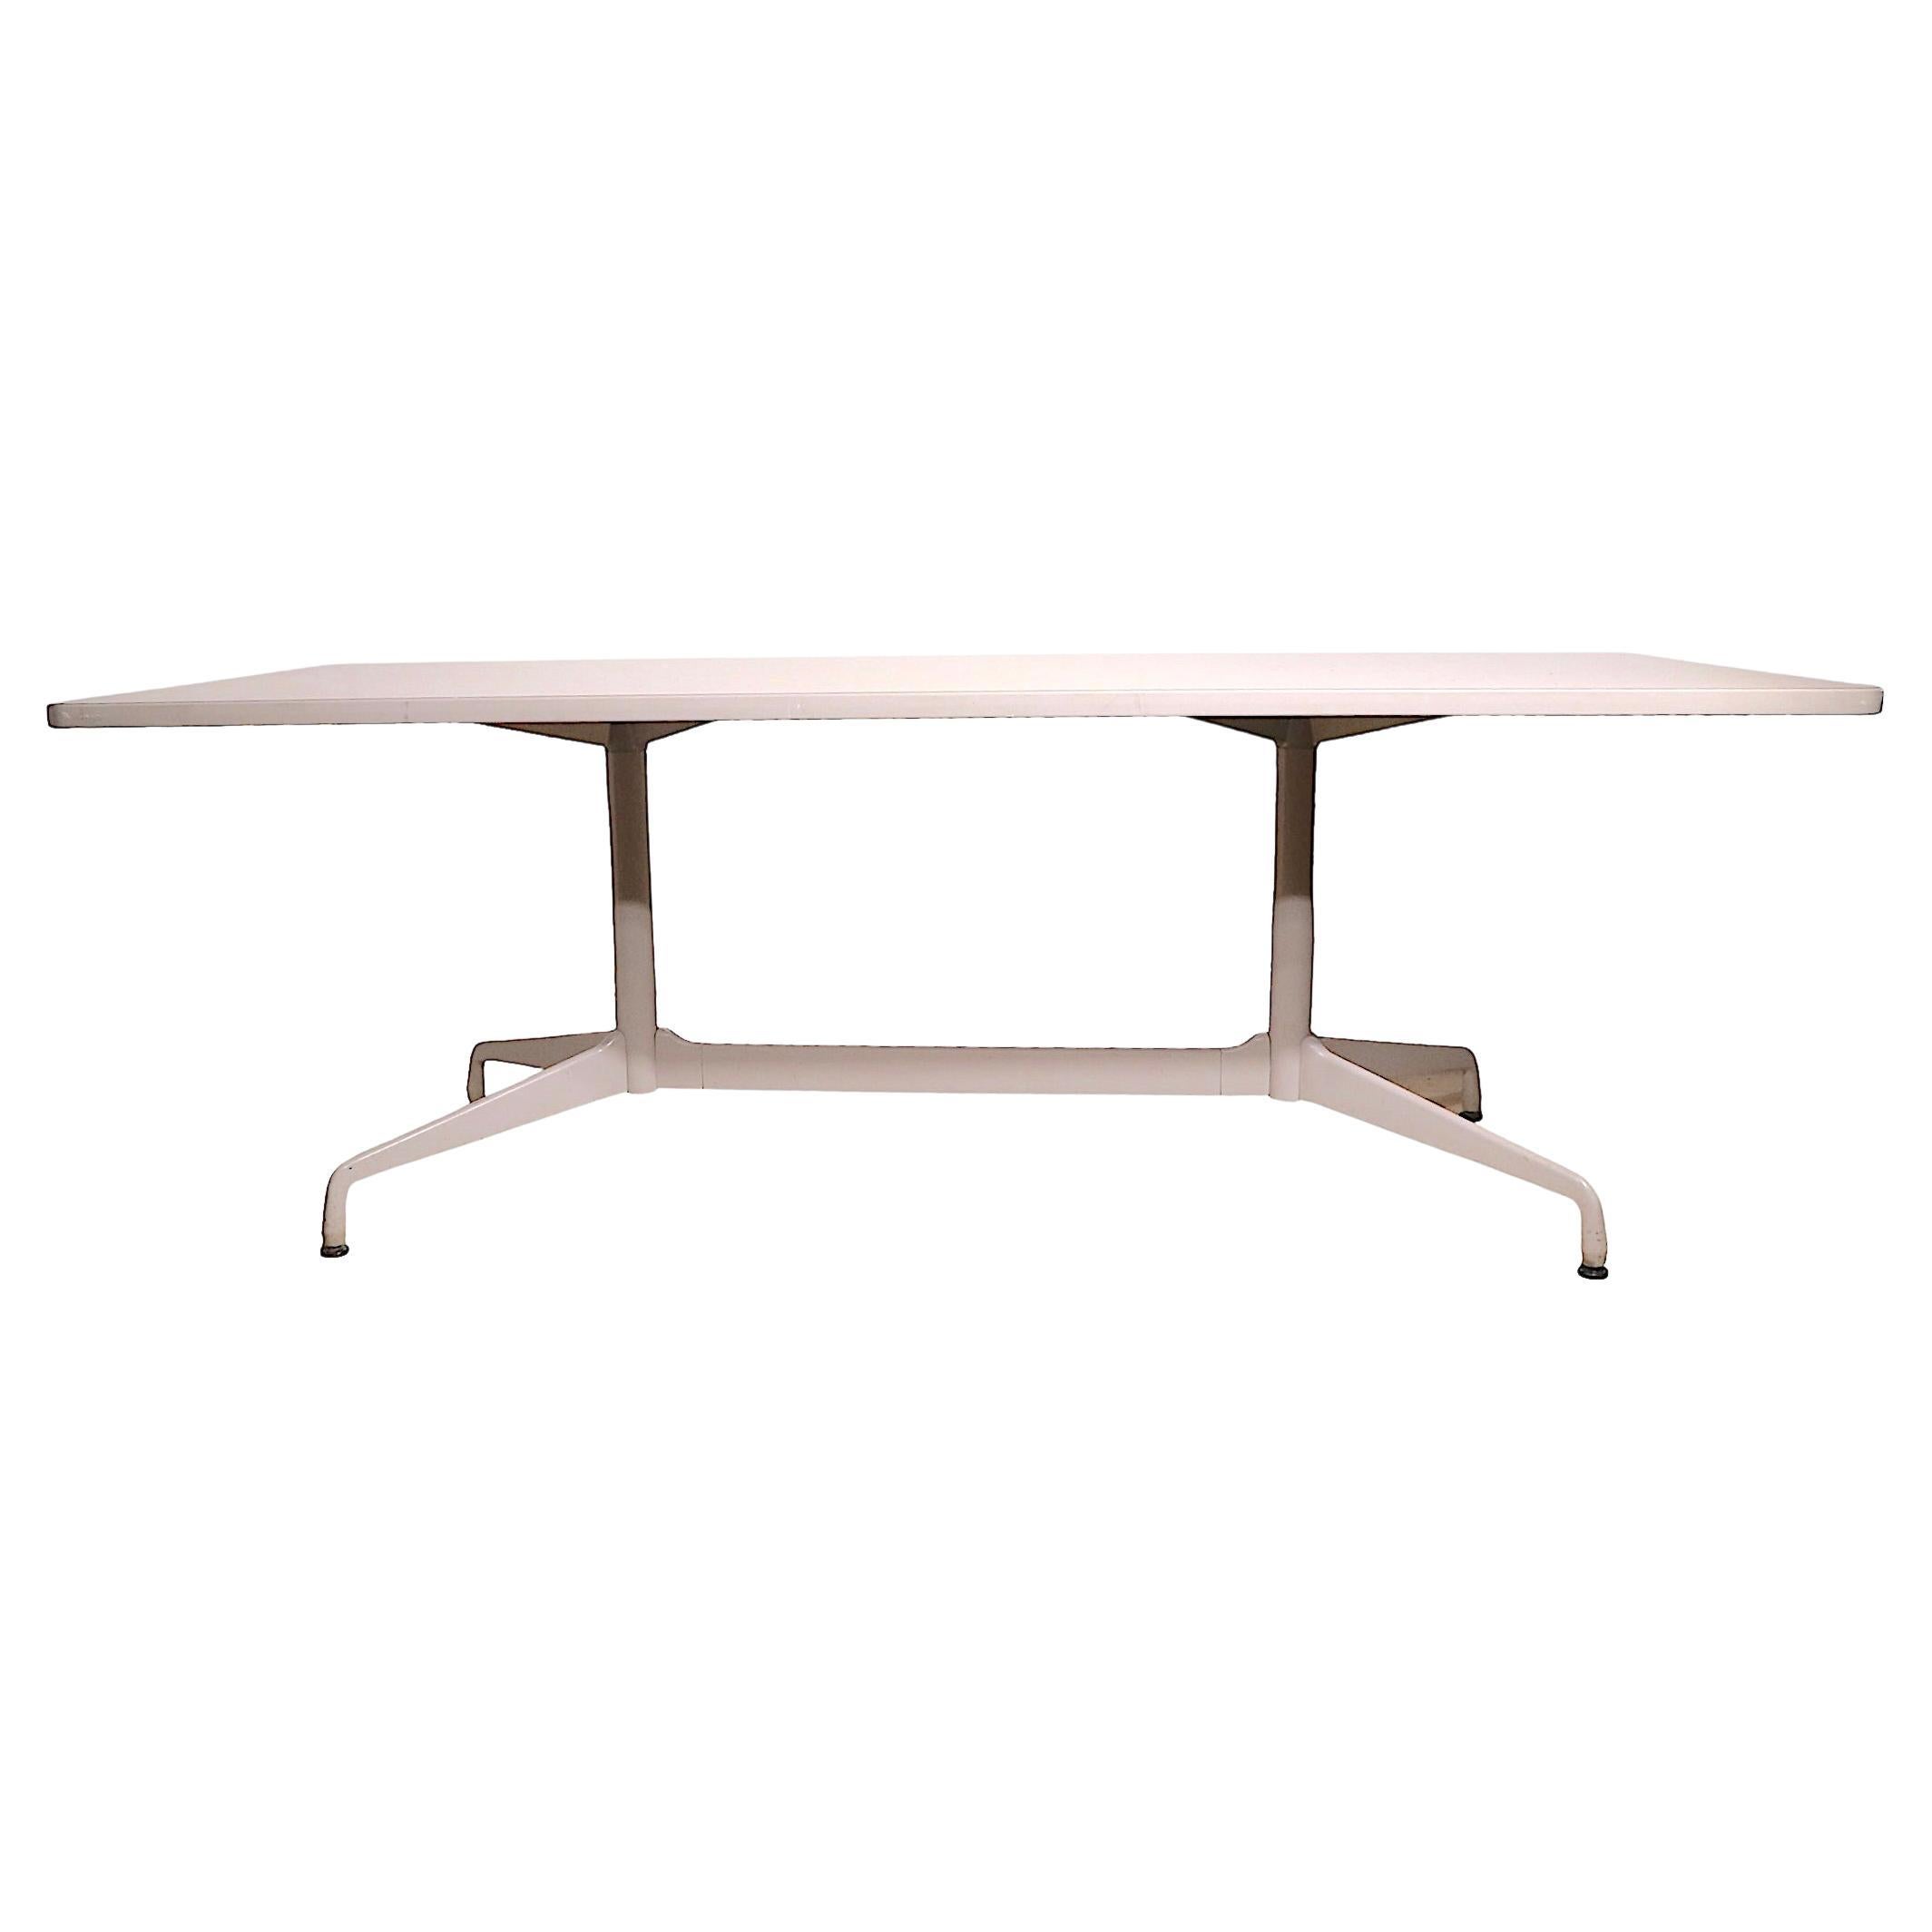 Unusual White on White Eames for Herman Miller Dining Conference Table